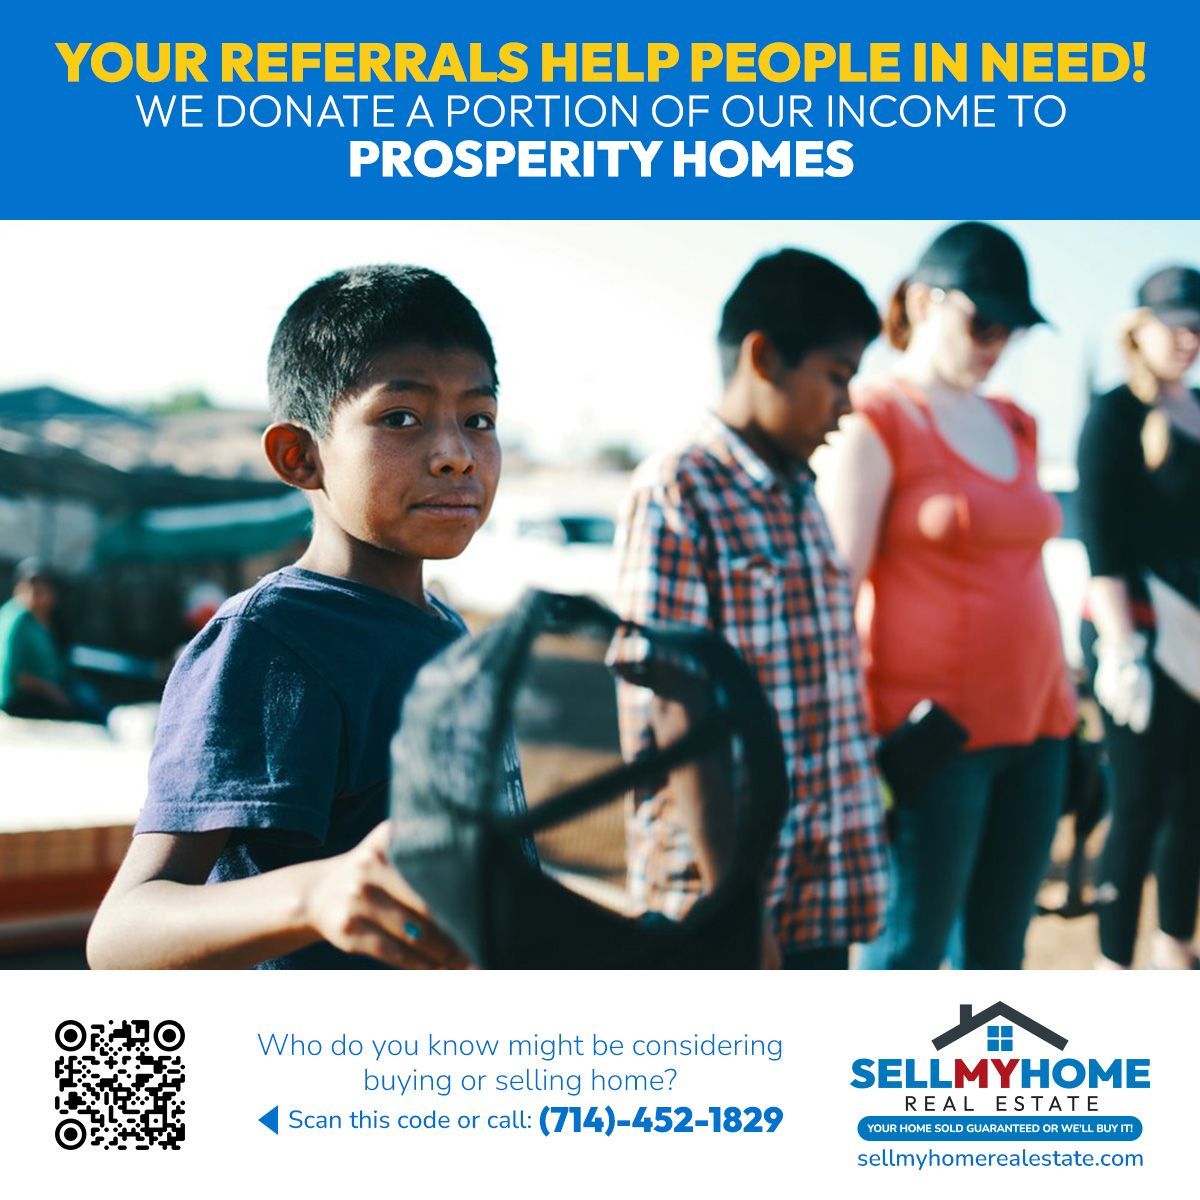 Your referrals help those in need! We donate a portion of our income to Prosperity Homes, providing housing for families who live in poverty.

Do you know anyone who might be interested in buying or selling a home? Call or text (714) 452-1829 or visit buff.ly/451gXQF